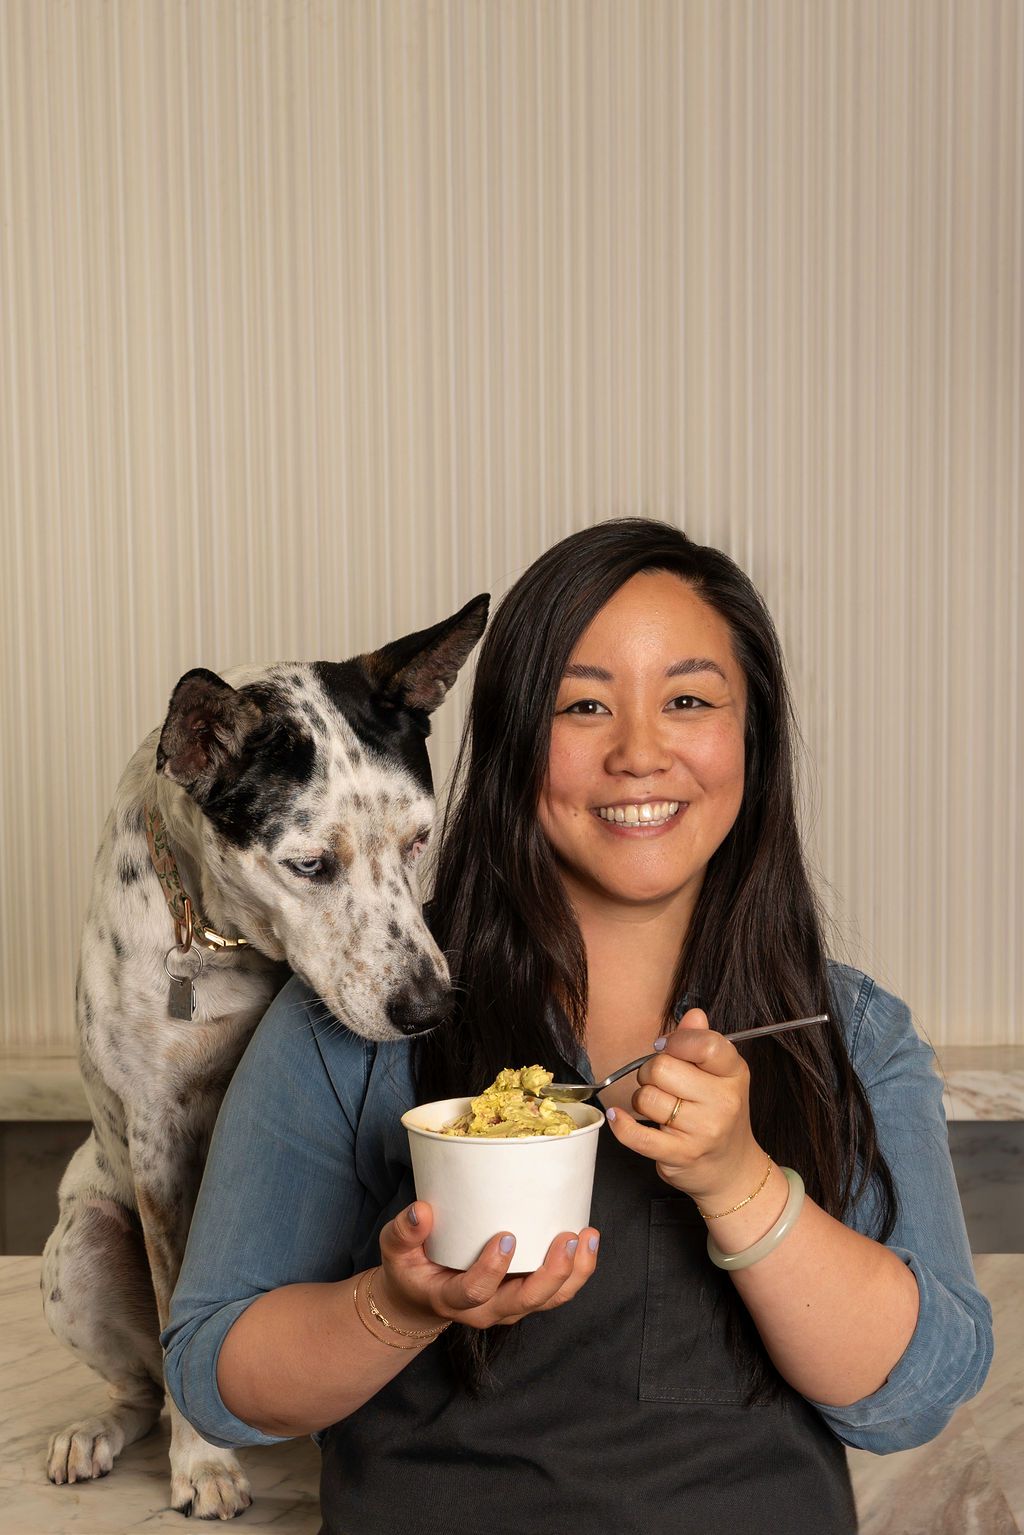 A woman holds ice cream and a dog looks over her shoulder.